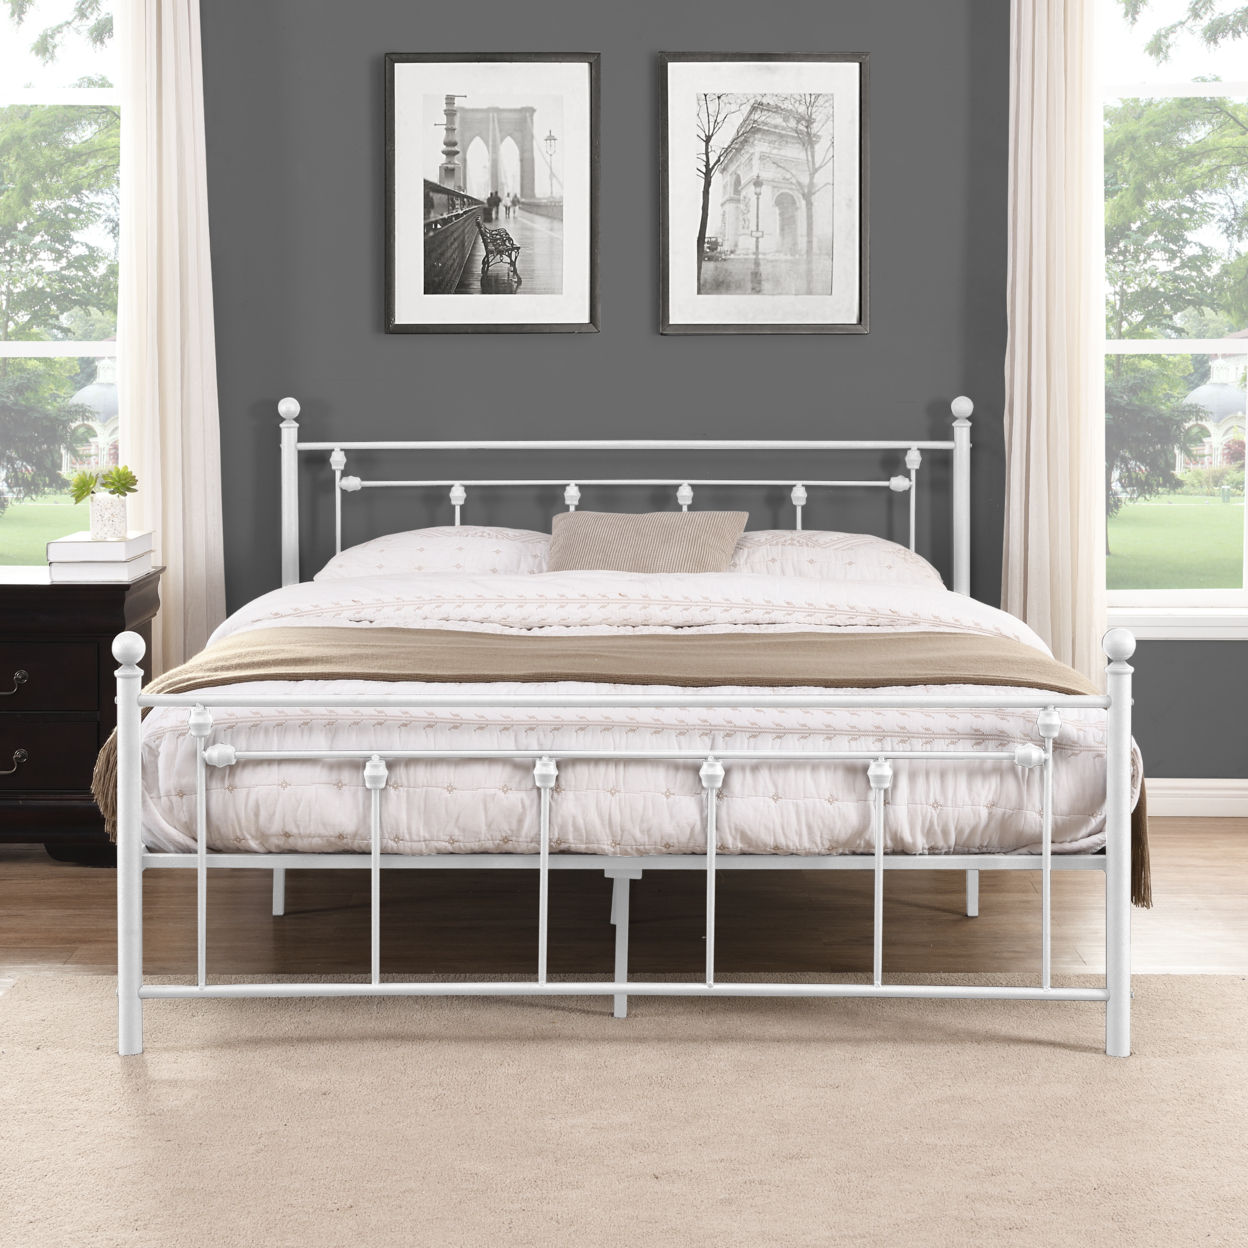 Queen Size Metal Bed Frame with Headboard and Footboard (White)